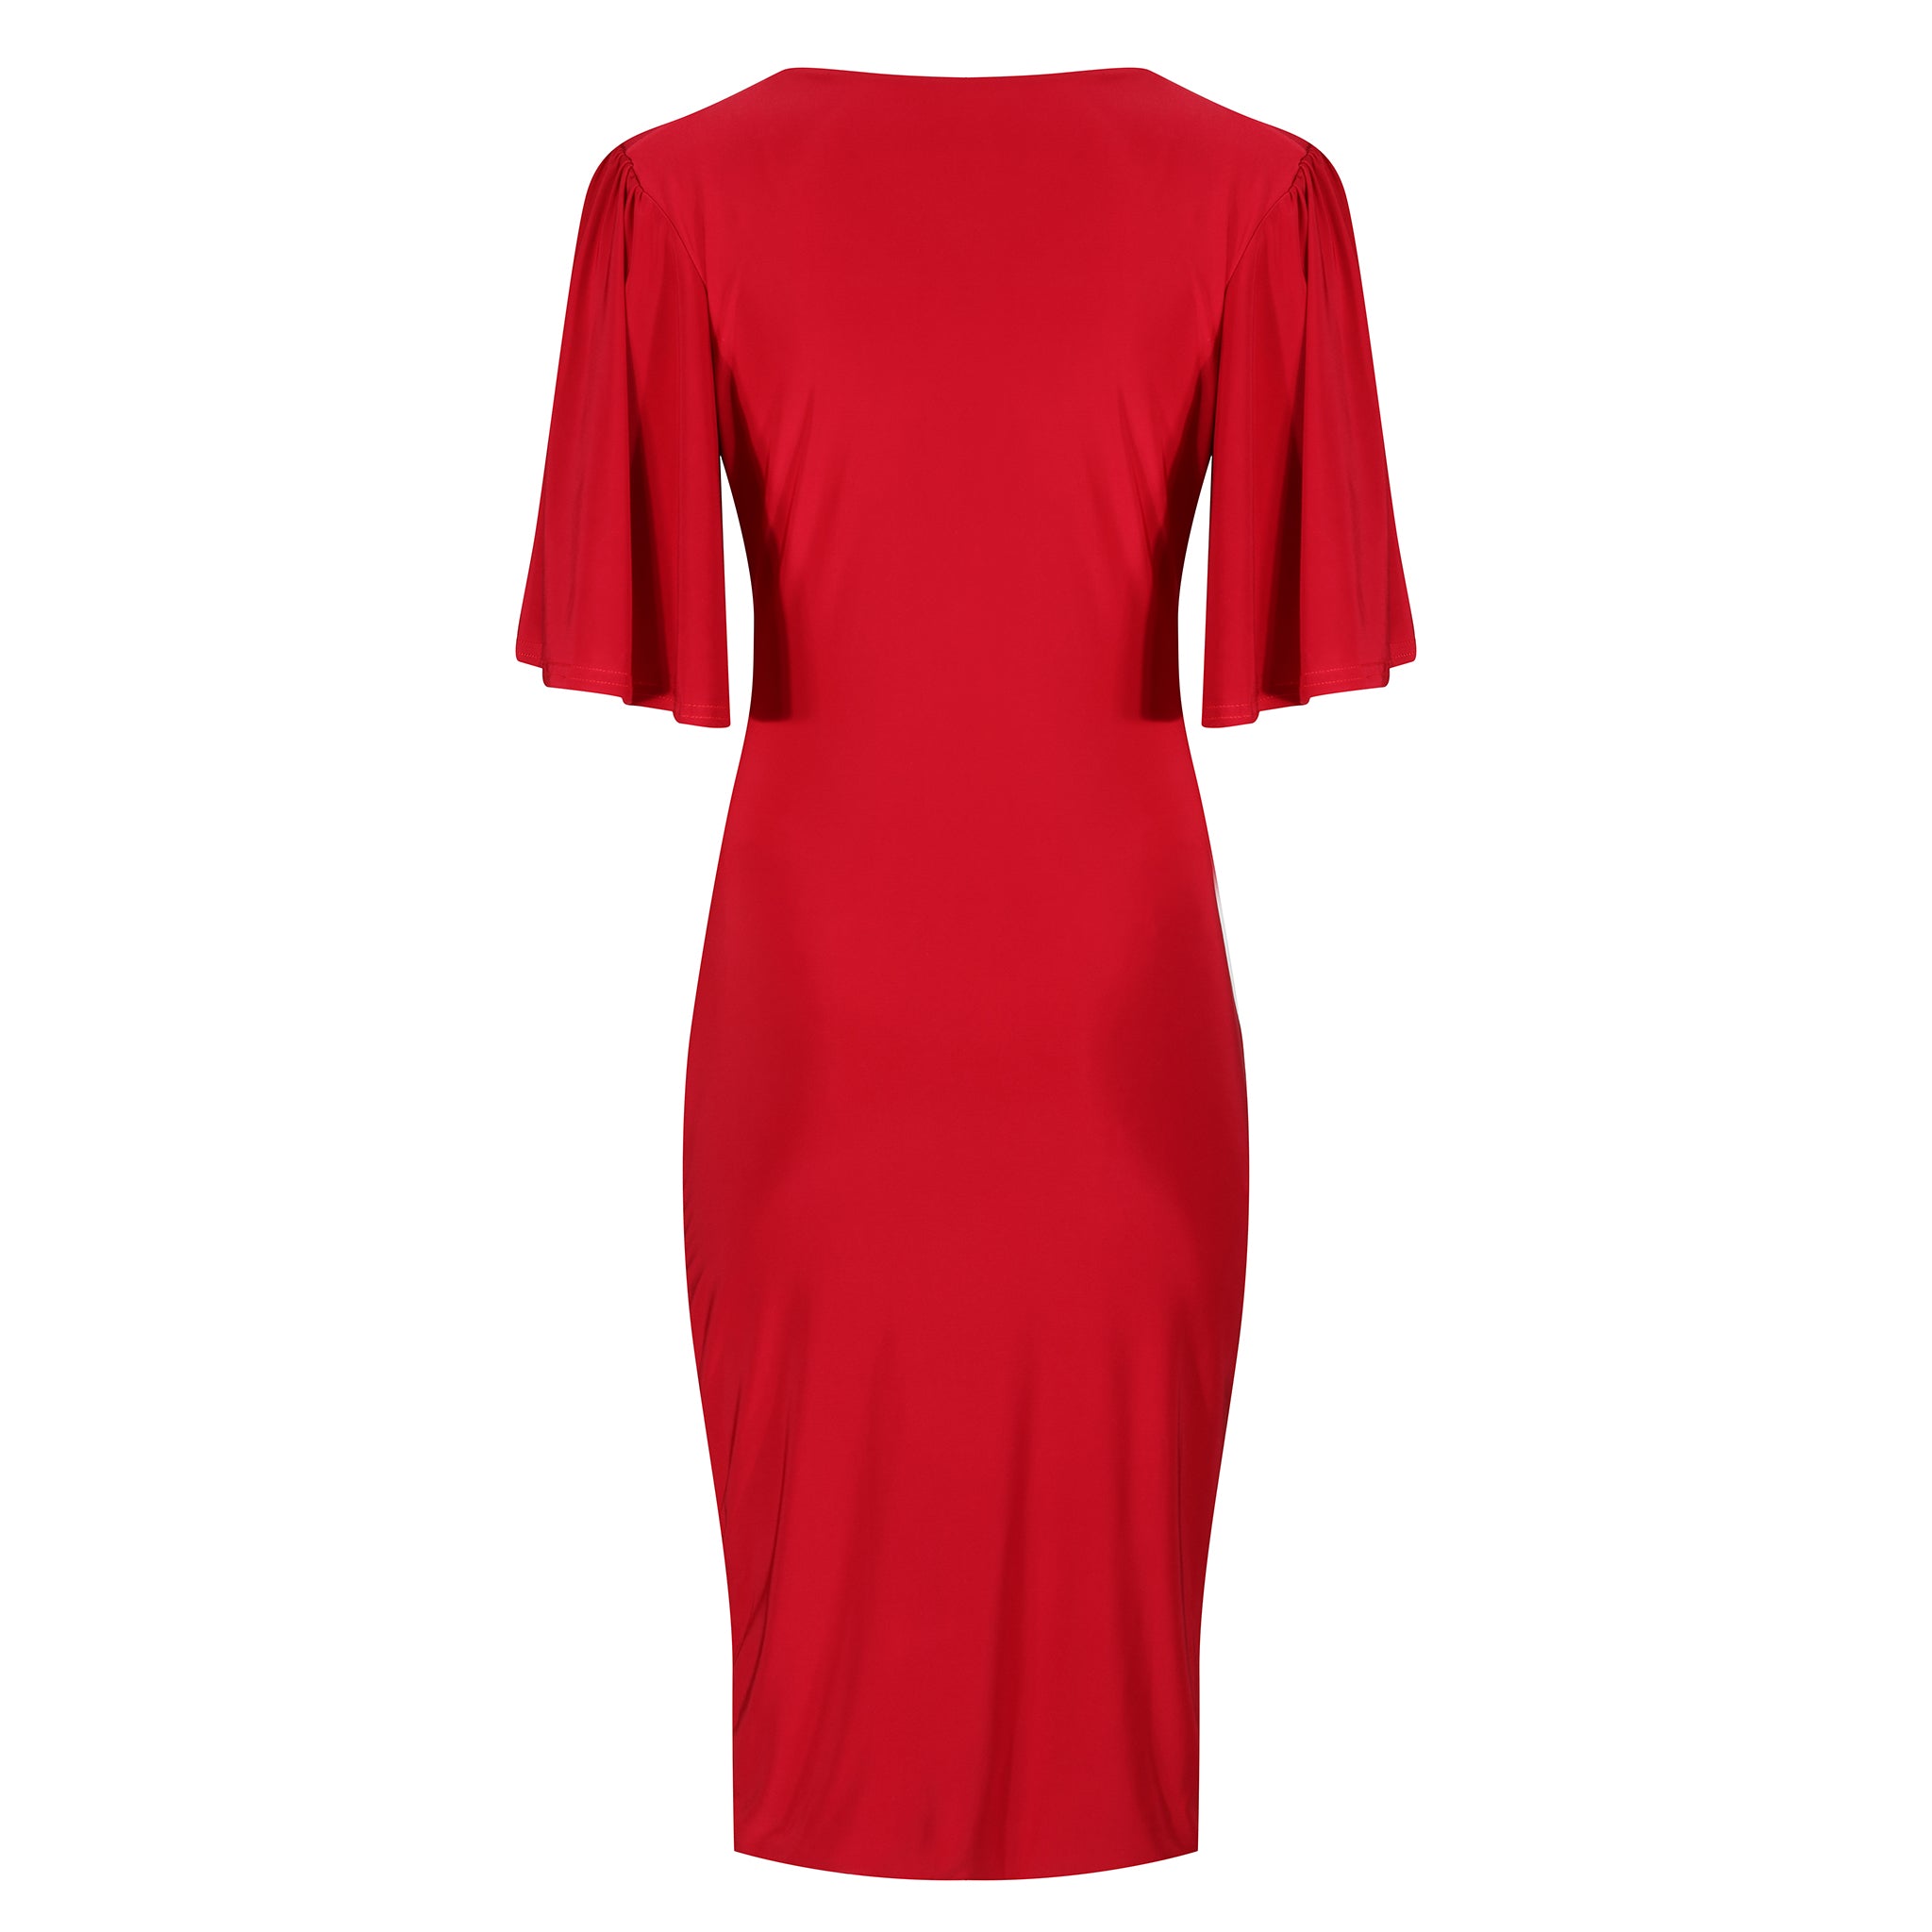 Red Wrap Top Slinky Cocktail Wiggle Dress w/ Butterfly Sleeves